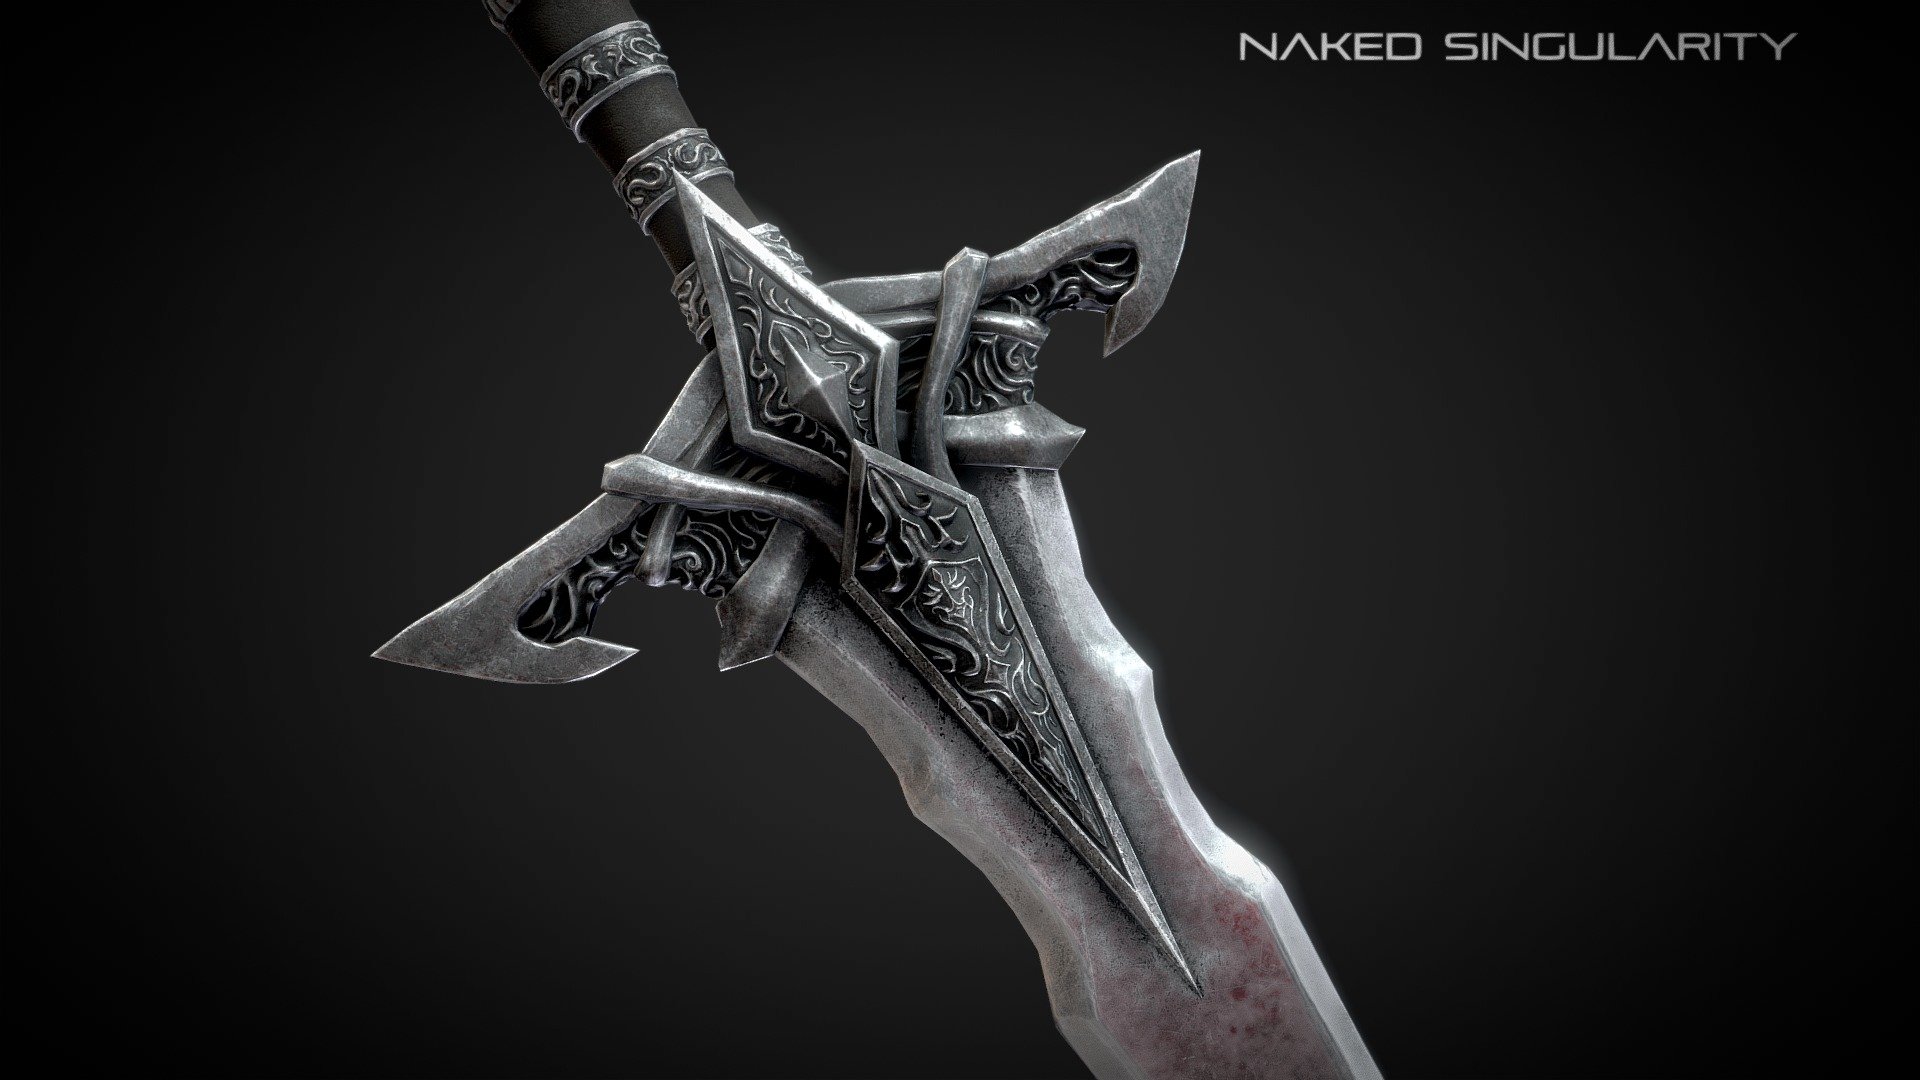 Royal capital knight sword | Medieval dark fantasy weapon | Low poly | 4K | PBR

Original concept by Naked Singularity. Inspire by Dark Souls triology and Elden Ring


High quality low poly model.
4K High resolution texture.
UV channel 2 unwrapped (for lightmap in Unity, Unreal Engine).
Real world scale.
PBR texturing.

Check out other Dark fantasy game asset here

Customer support: nakedsingularity.studio@gmail.com

Follow us on: Youtube | Facebook | Instagram | Twitter | Artstation - Royal knight sword -Medieval dark fantasy weapon - Buy Royalty Free 3D model by Naked Singularity (@nakedsingularity) 3d model